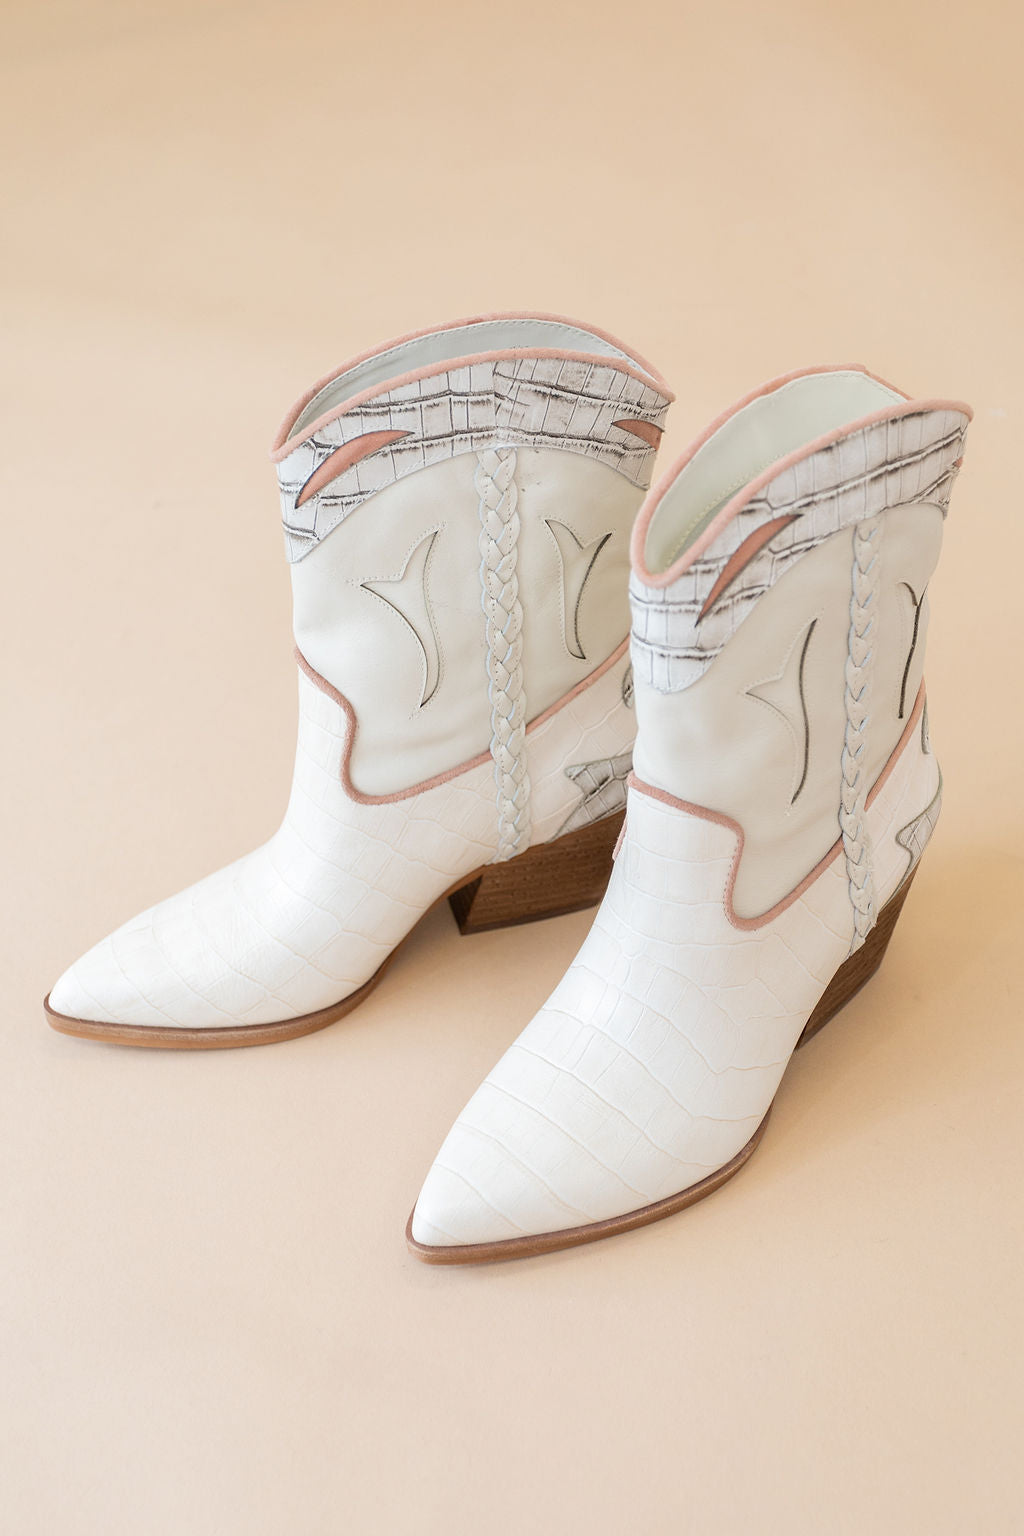 Dolce Vita | Loral Western Booties | Ivory Croc Print Leather